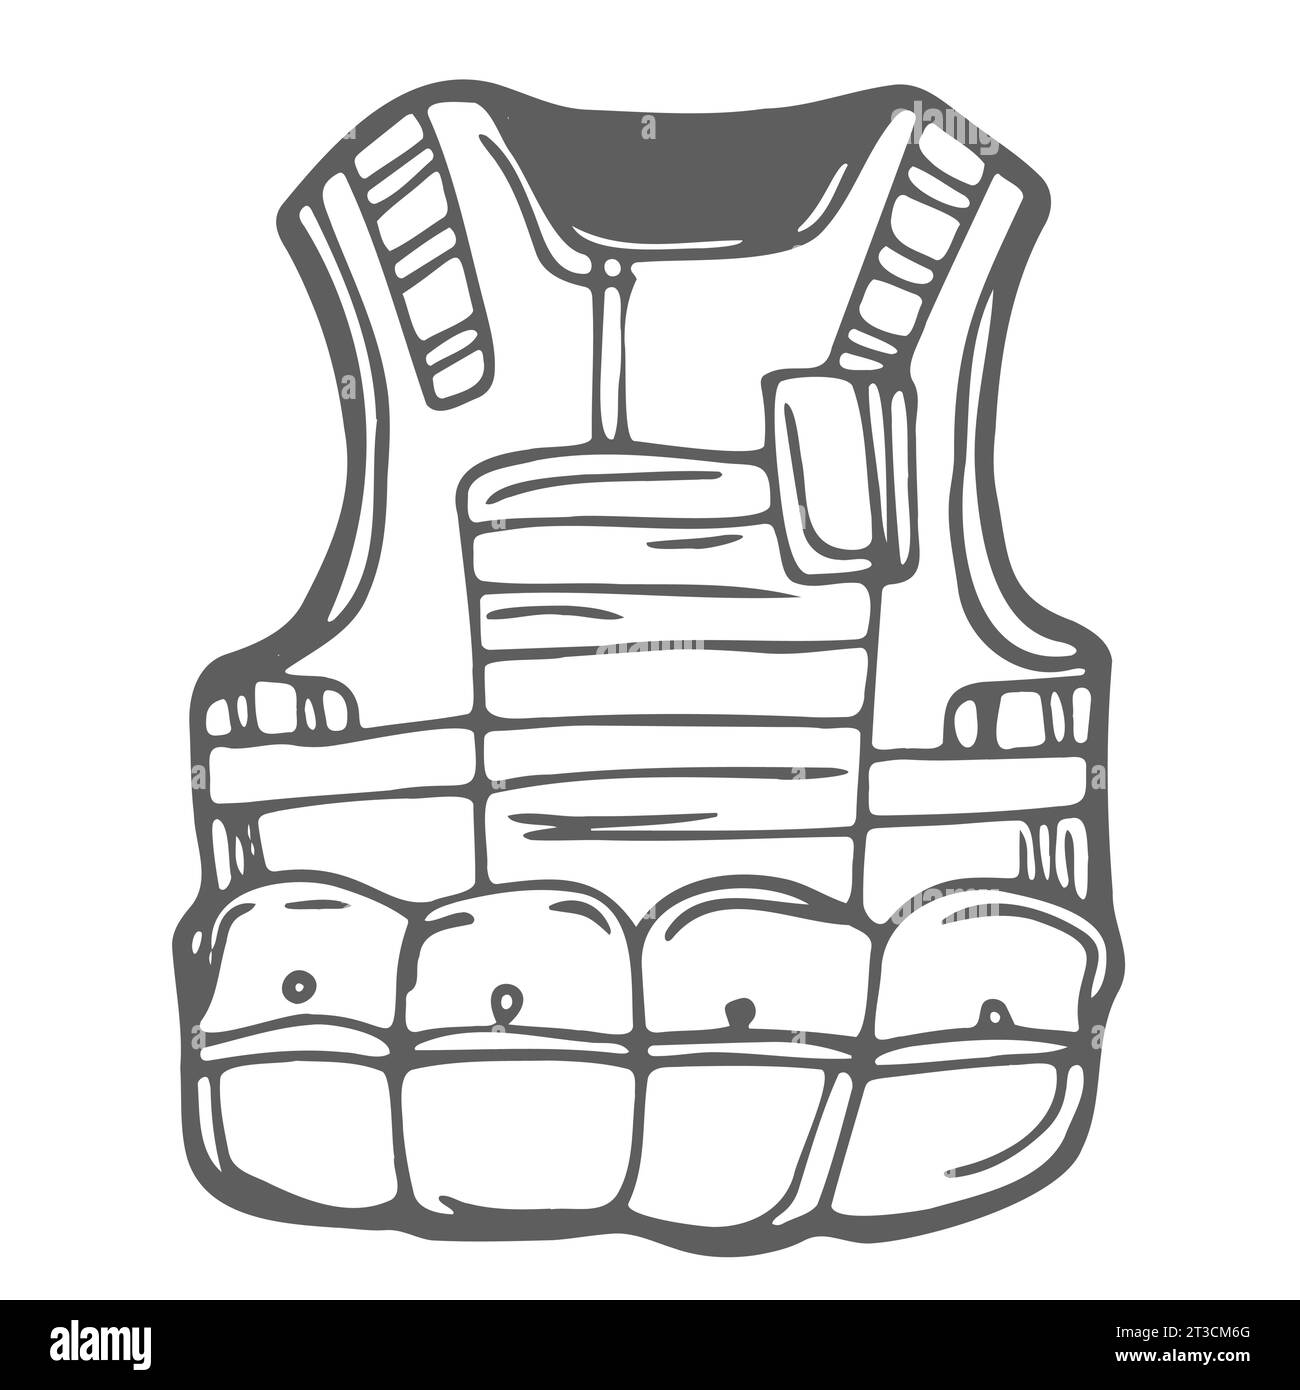 Bullet Proof Vest for Security Forces at Display Stock Photo